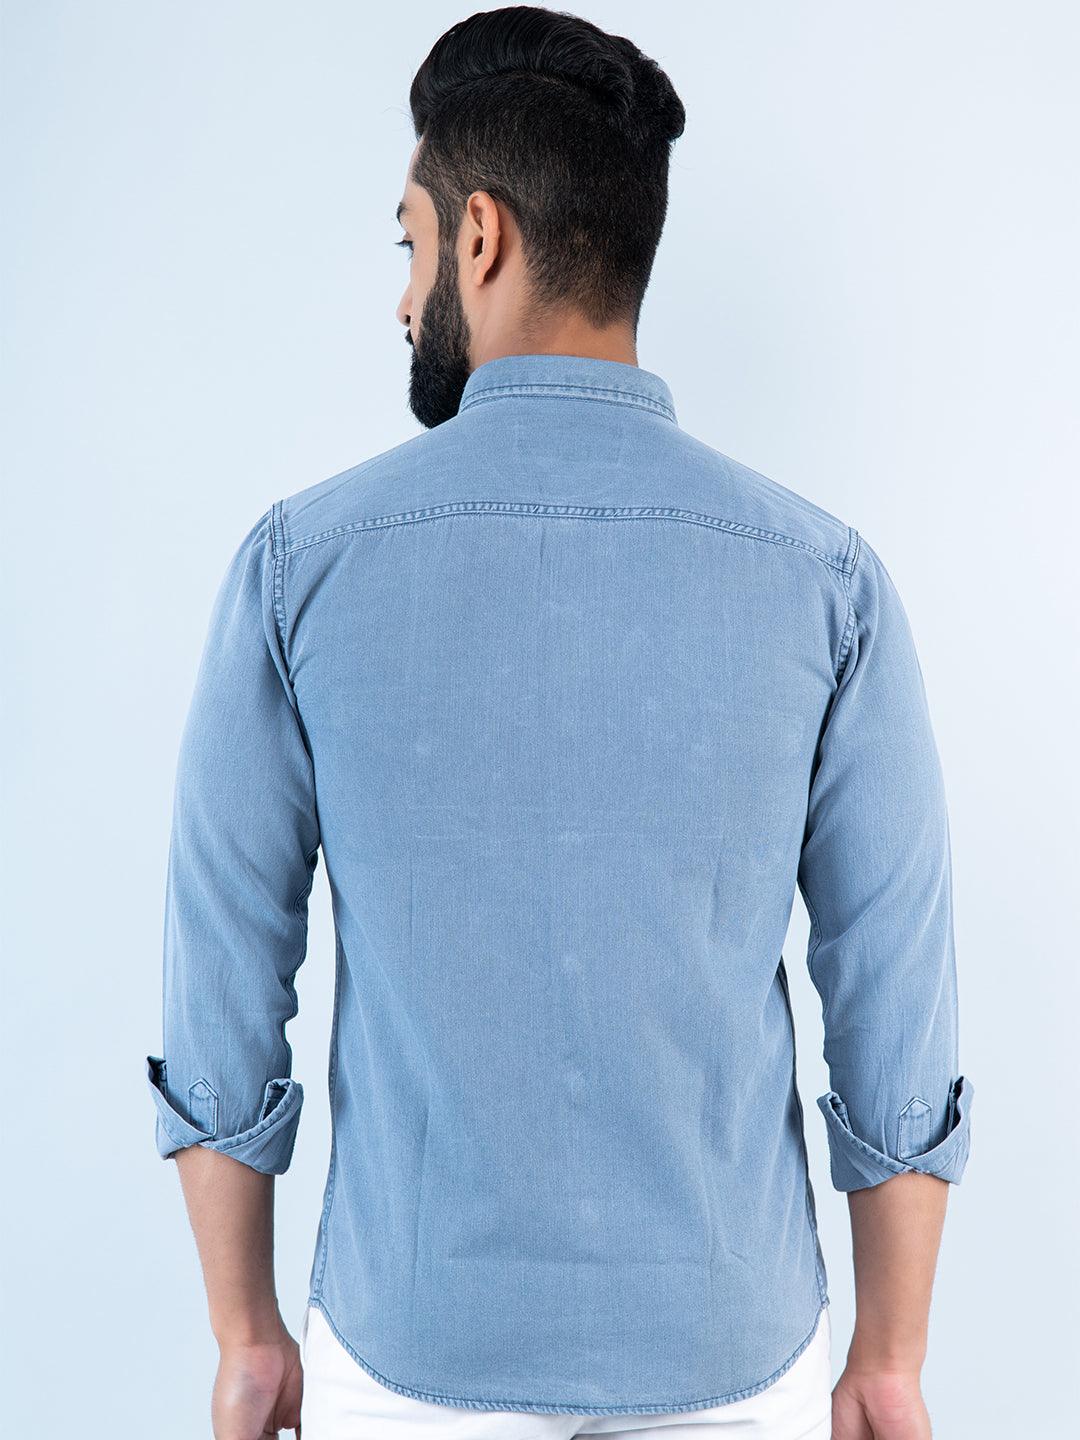 How to Wear Denim Shirts for Men: Tips and Tricks - Tistabene